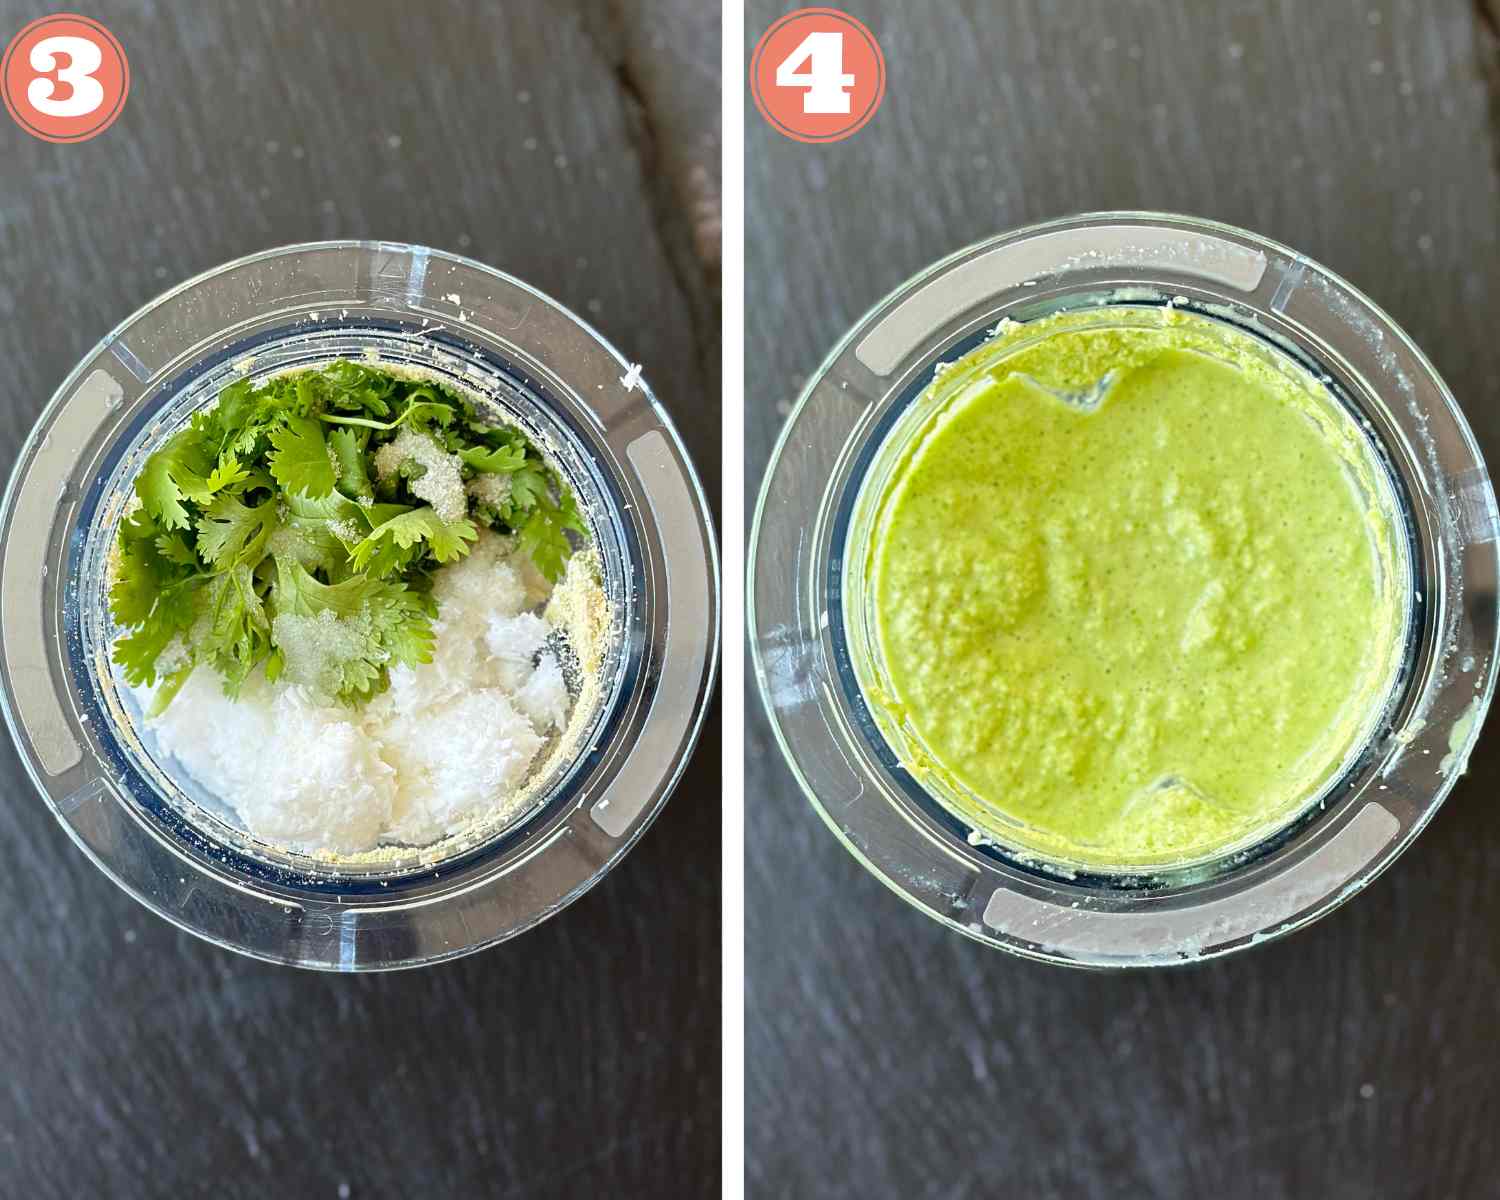 Collage steps to make coconut cilantro chutney; adding coconut, cilantro and spices to a blender jar and processing till smooth. 